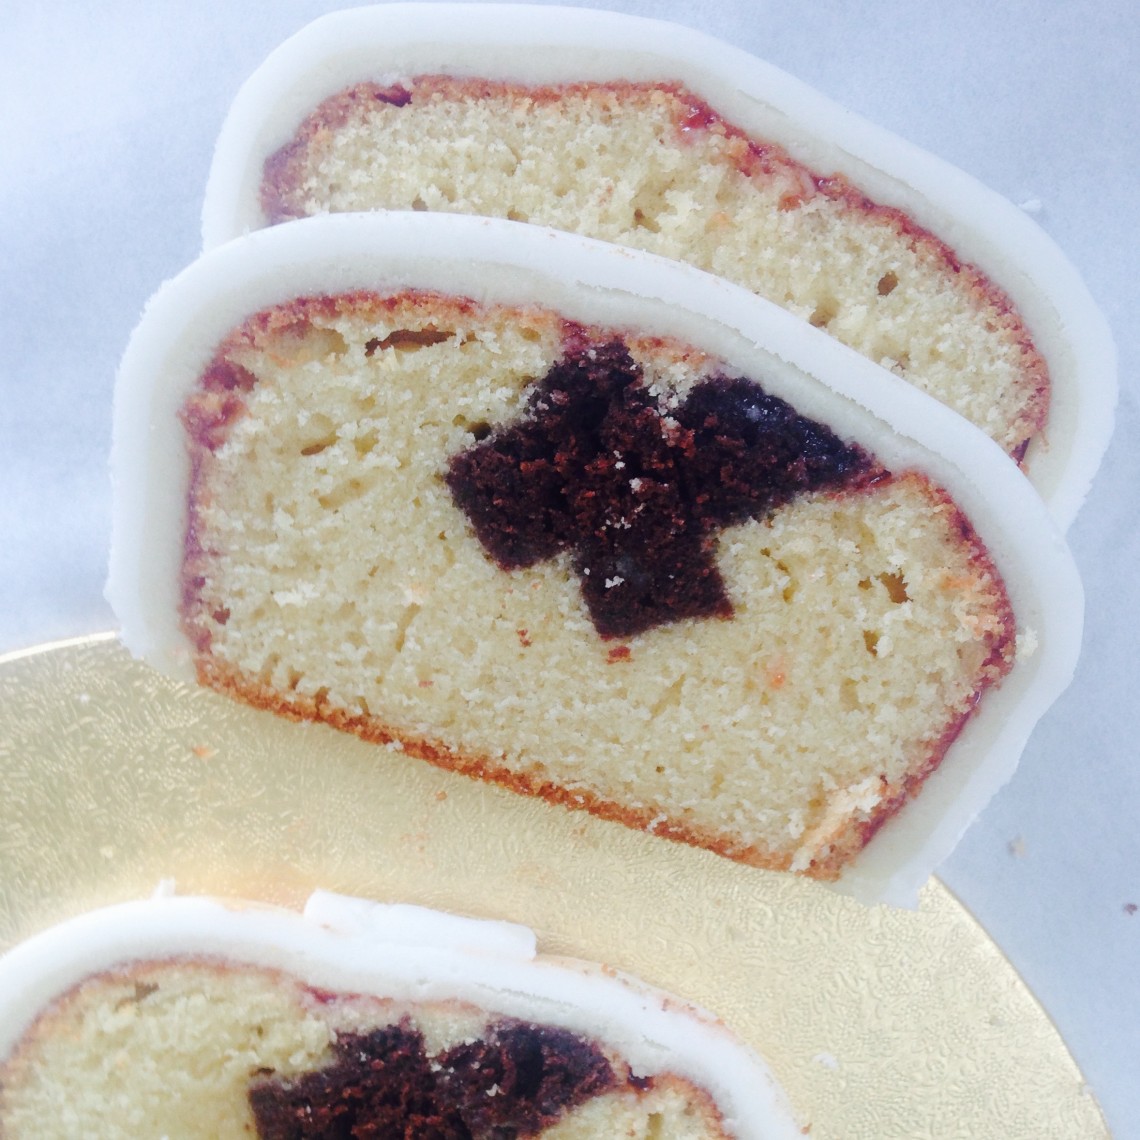 You won't believe this First Communion Cake with hidden chocolate sponge crucifix inside